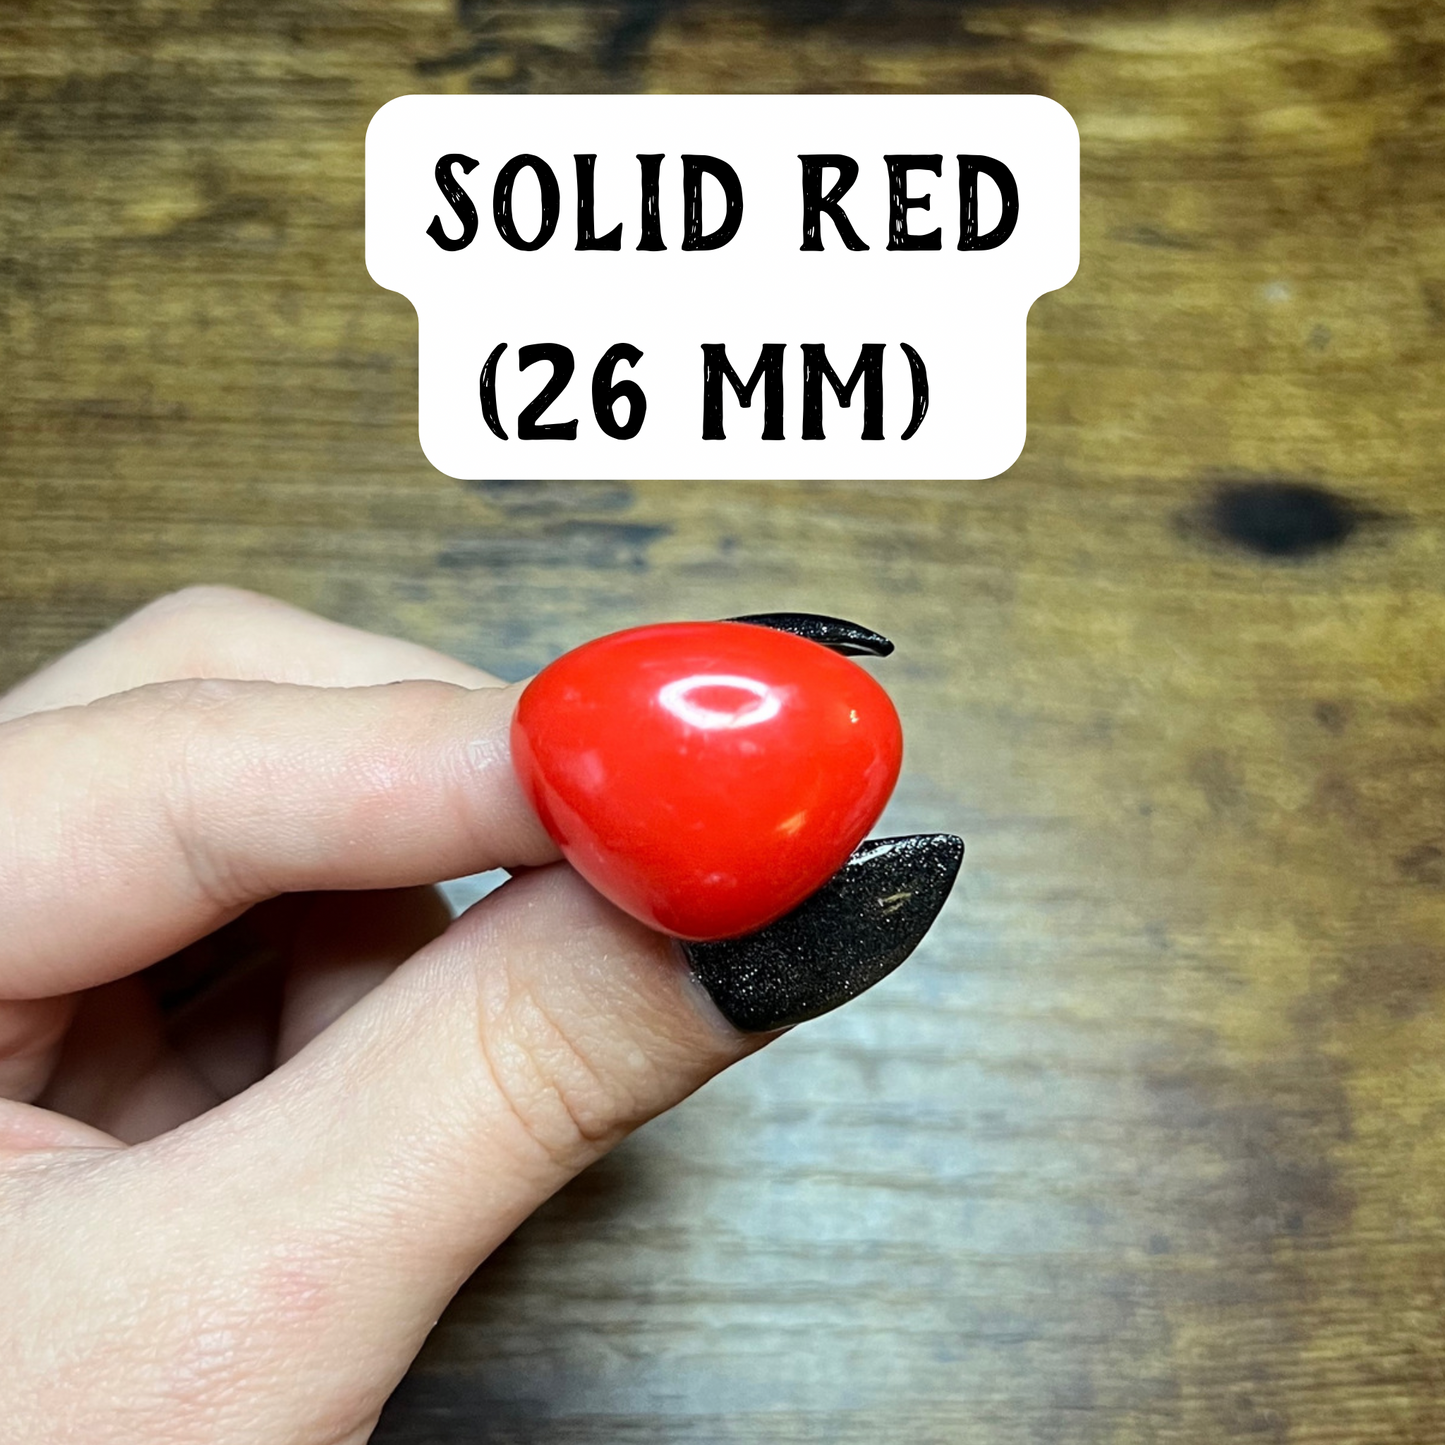 Red Safety Nose (26 MM)